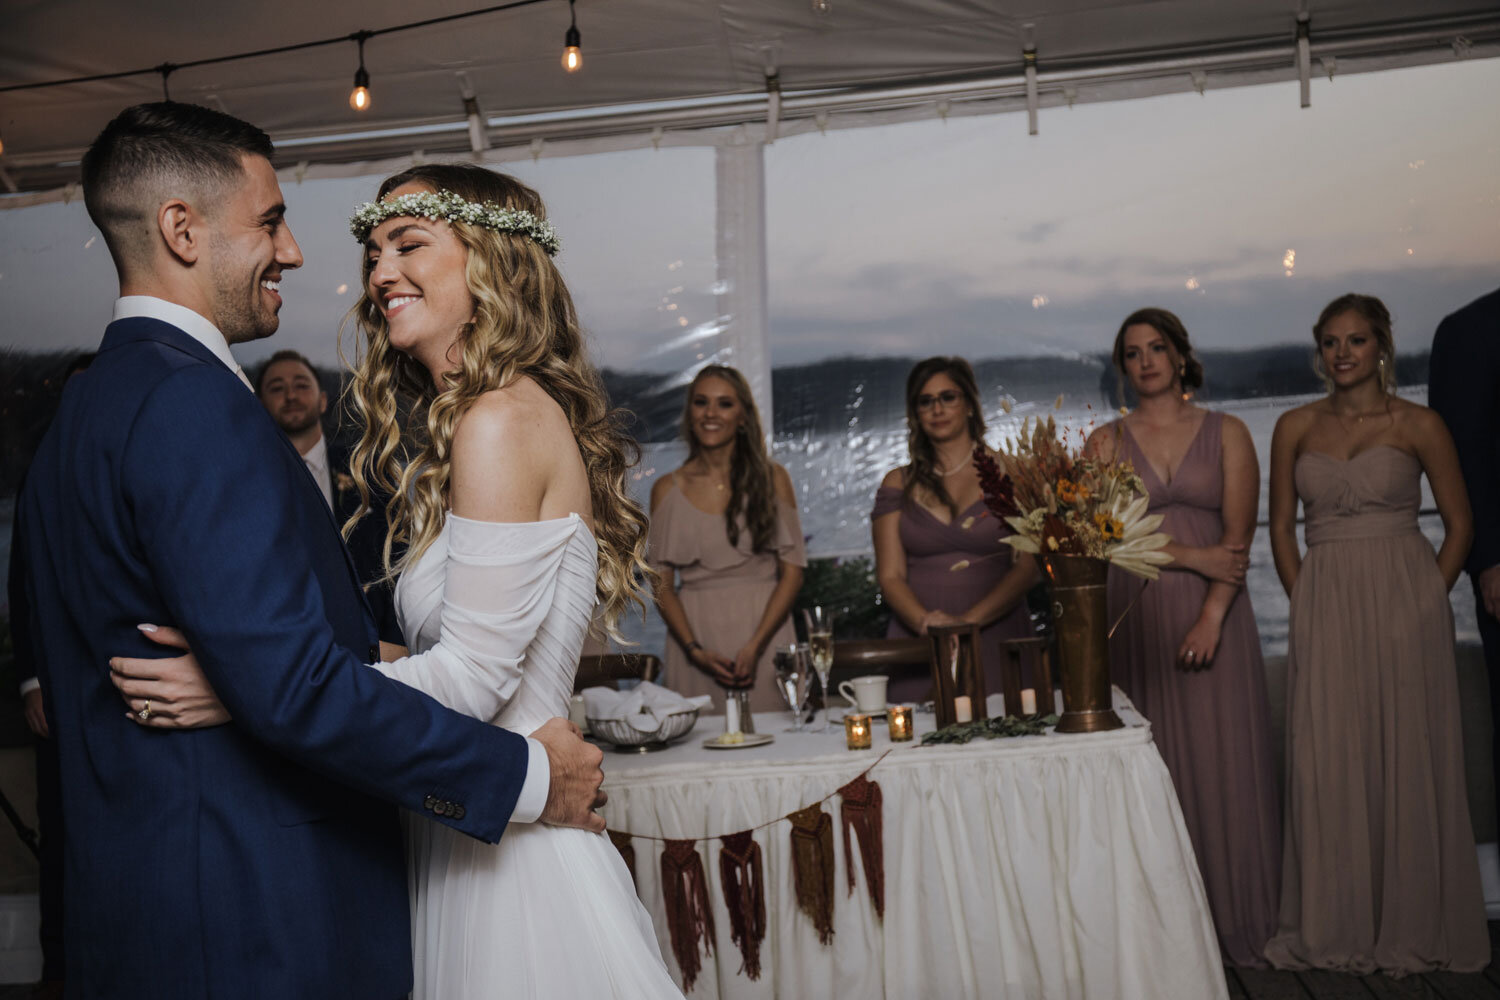 a birde and groom take their first dance